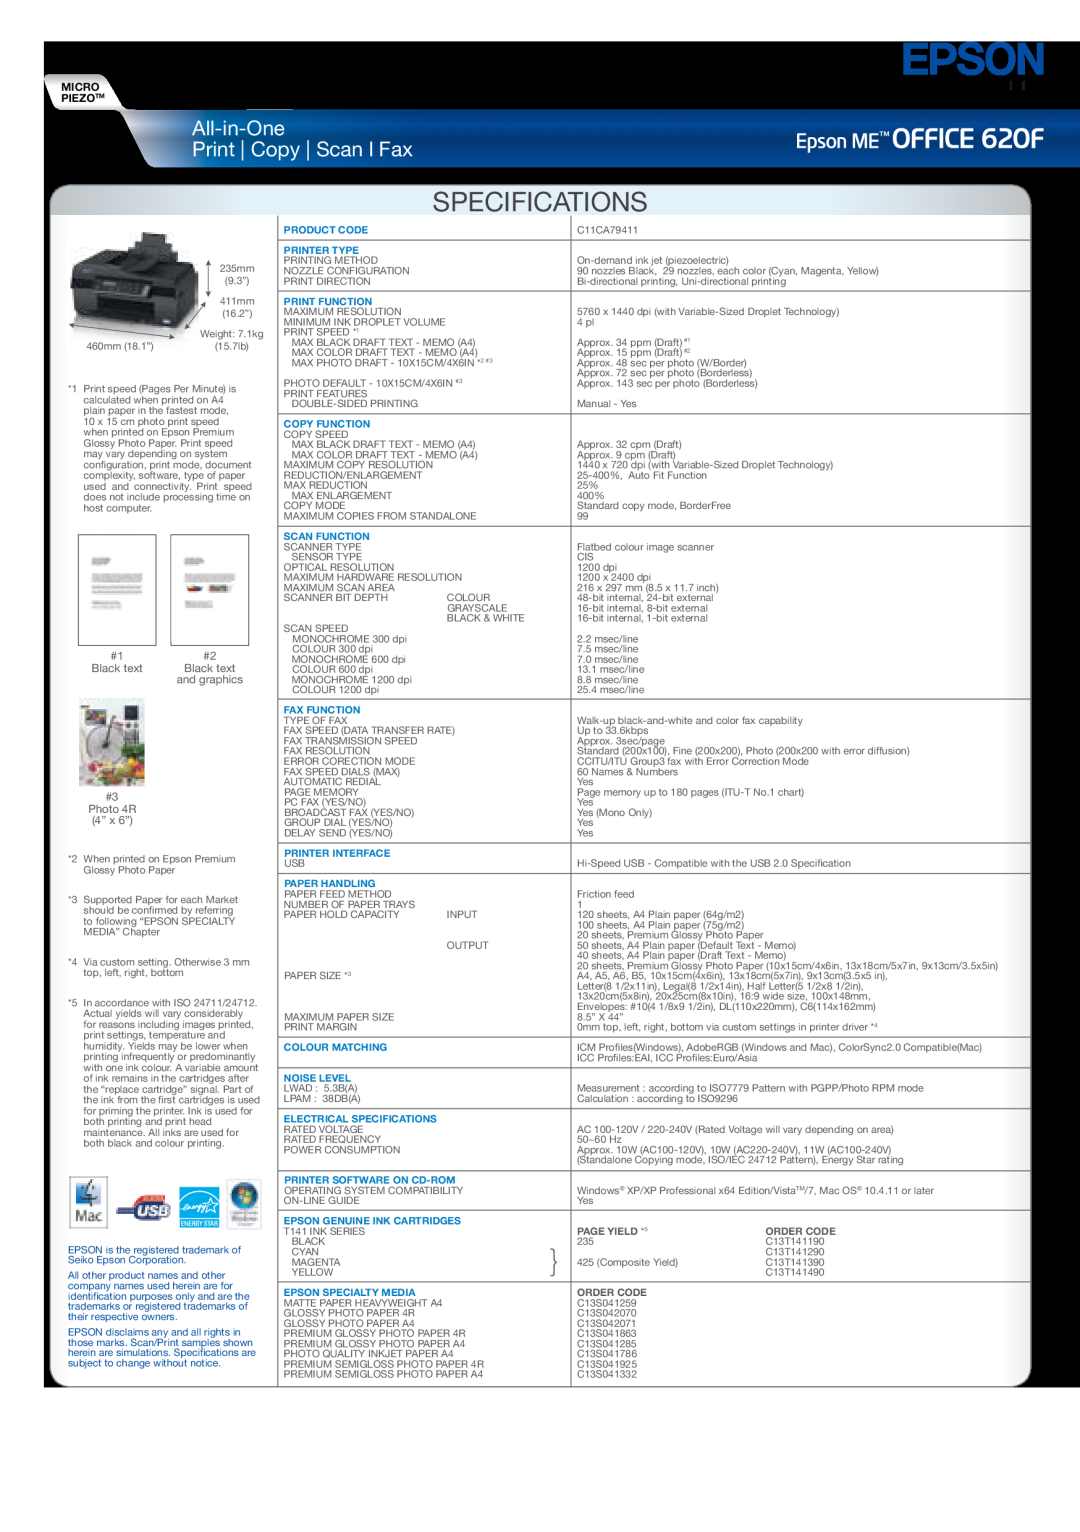 Epson 620F Specifications, All-in-One Print Copy Scan l Fax, Micro Piezotm, Black text, and graphics, #3 Photo 4R 4” x 6” 